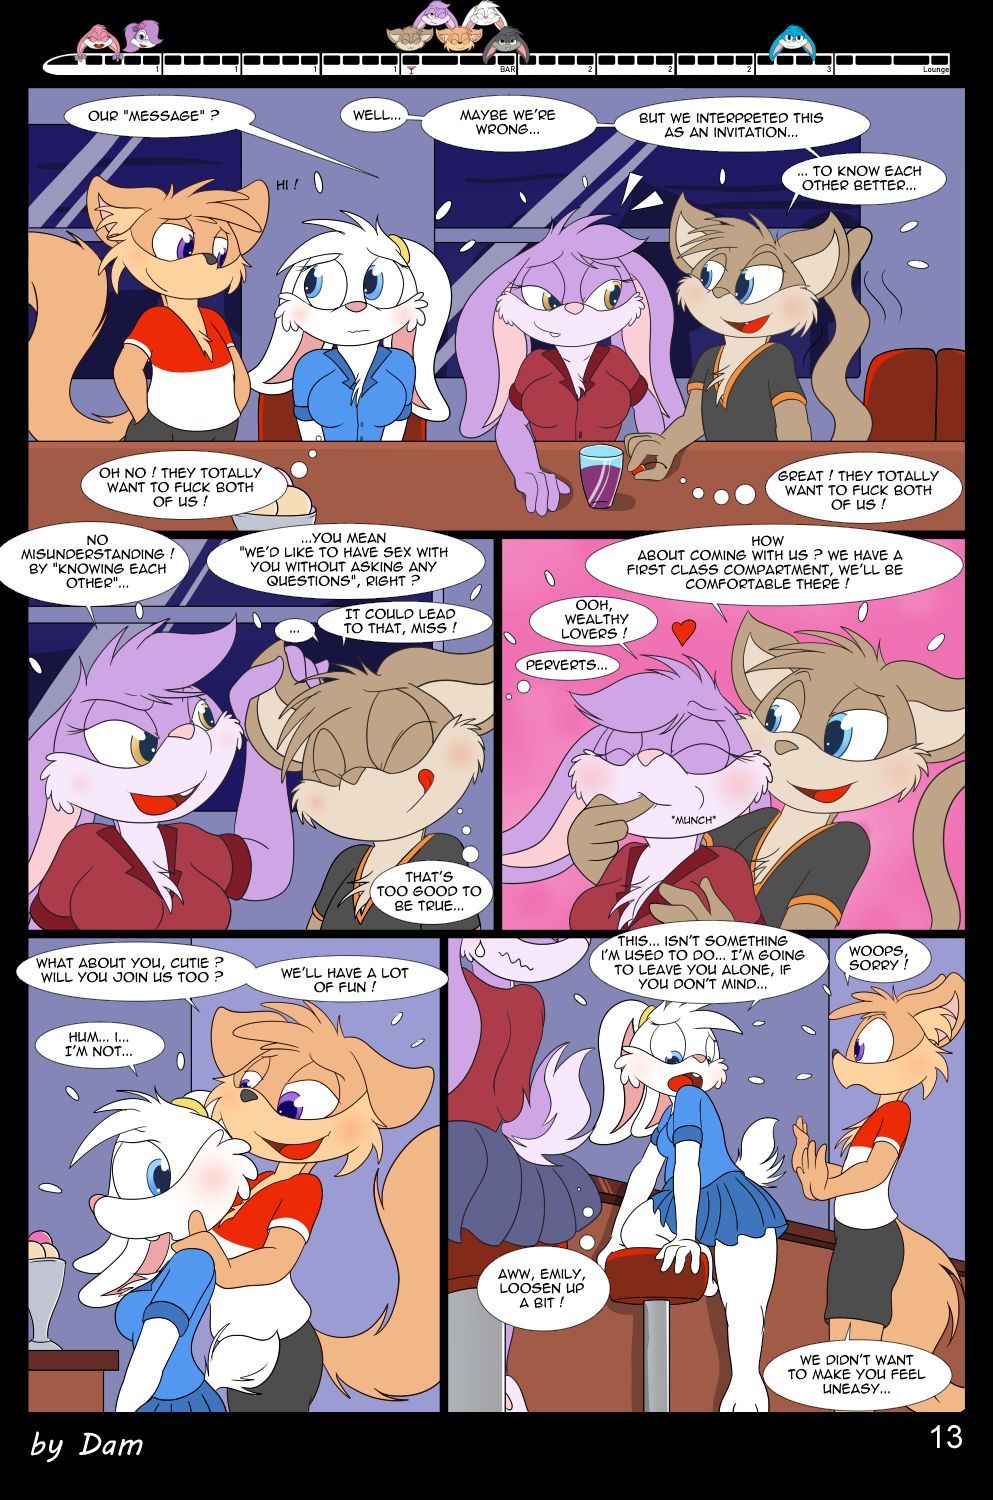 [Dam] Toons on a train [Ongoing] 13